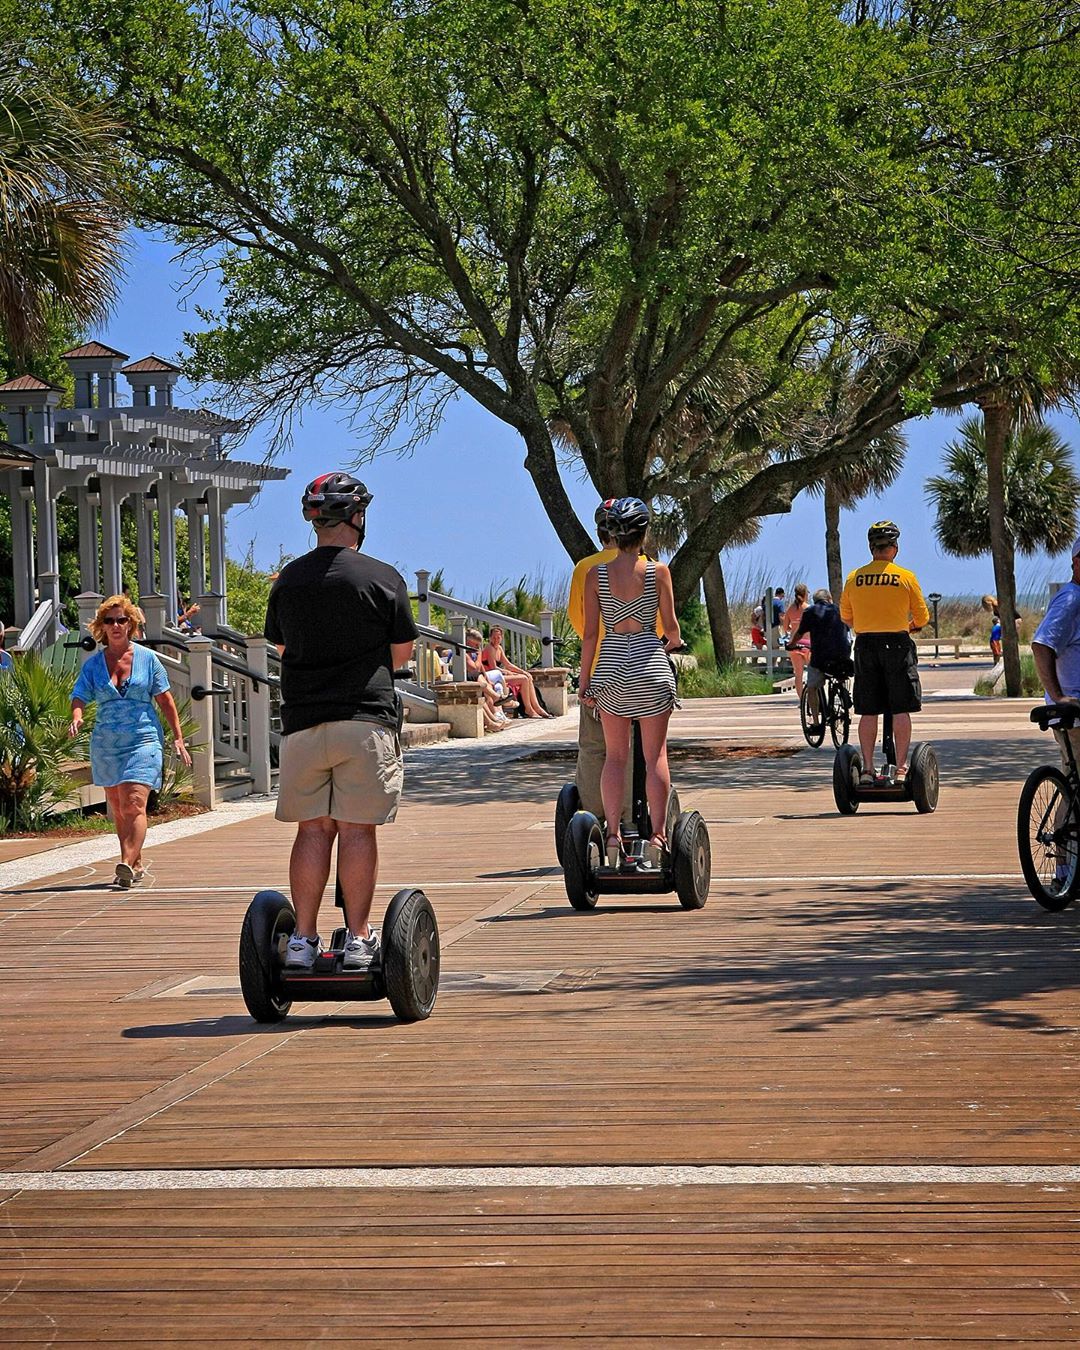 People riding segways on a sunny day. Photo by Instagram user @hhistayandplay